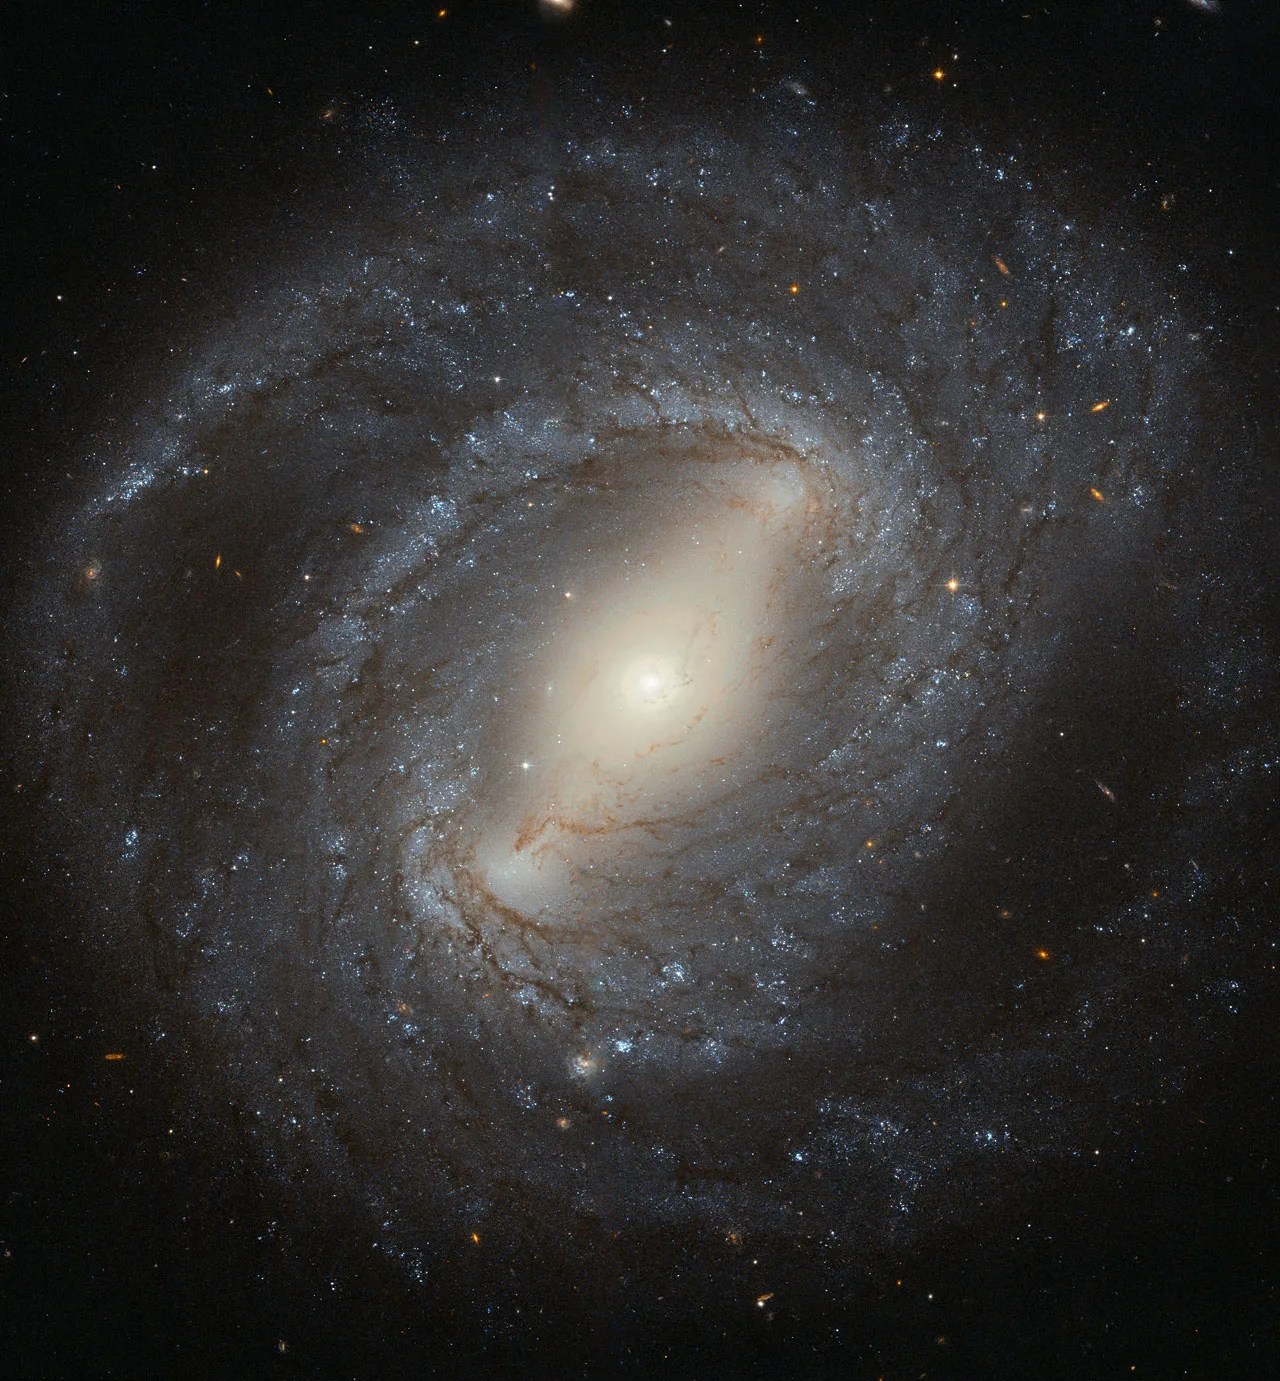 Ngc 4394 is the archetypal barred spiral galaxy with spiral arms emerging from the ends of a bar that cuts through the galaxy